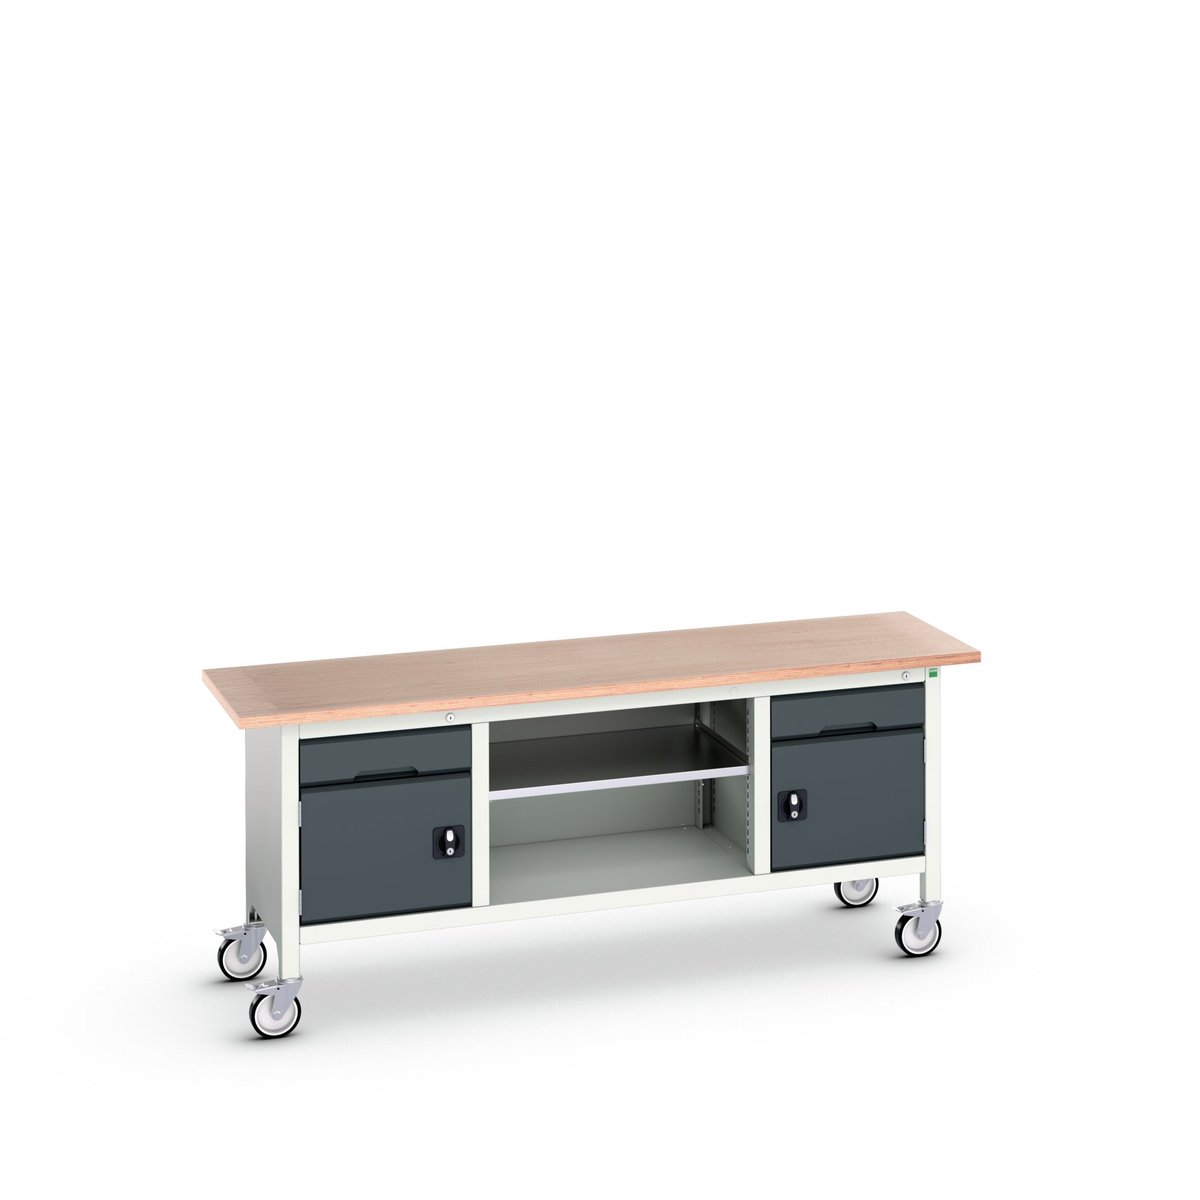 16923231. - verso mobile storage bench (mpx)